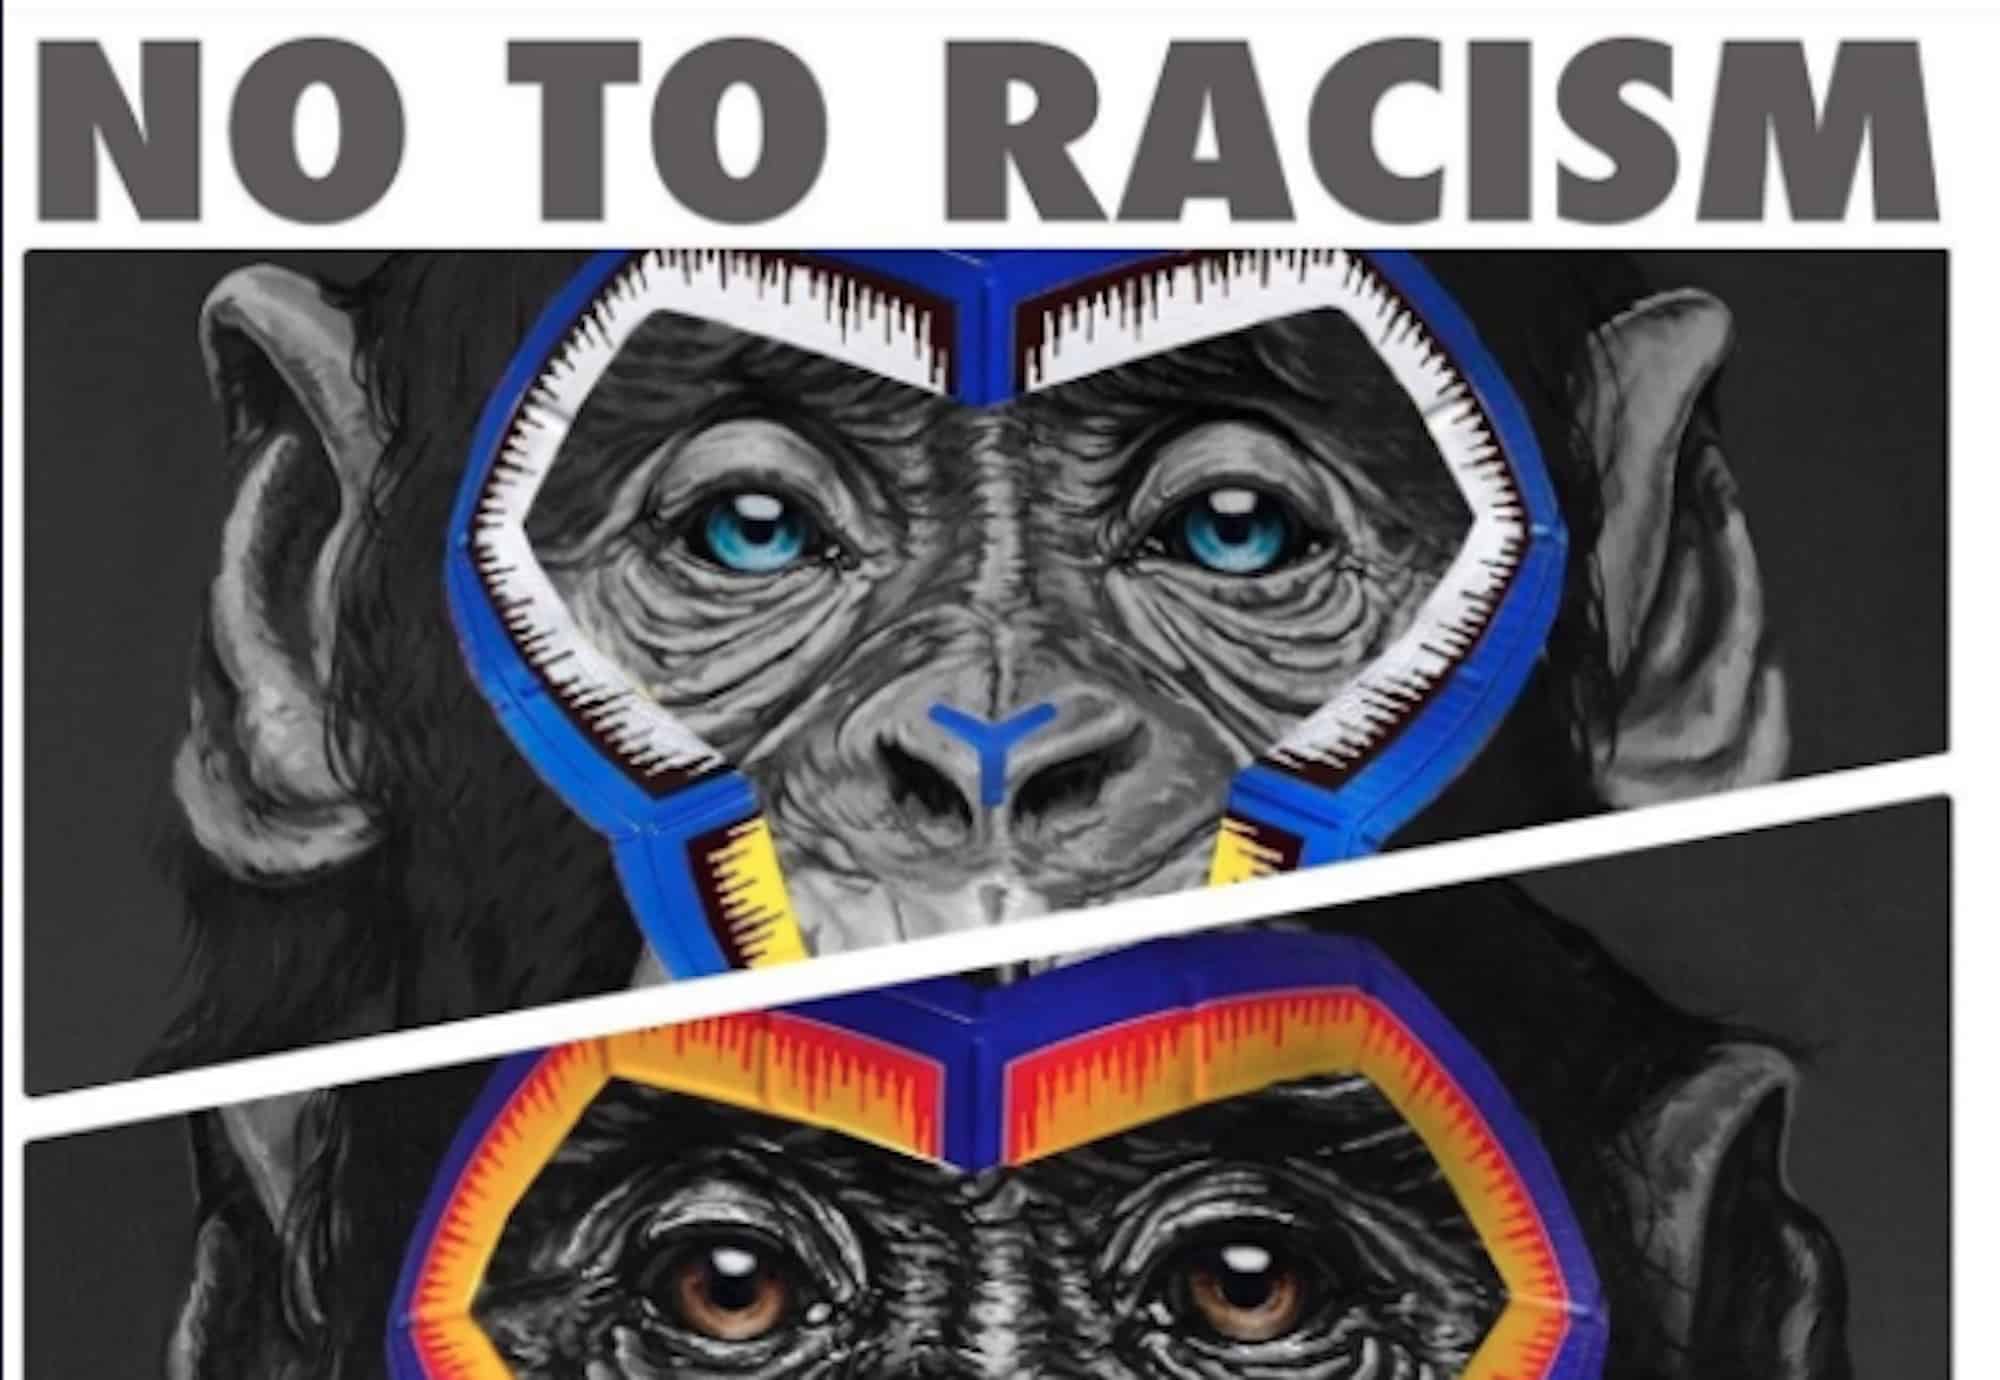 AC Milan and Roma join outrage as Serie A uses monkey images in anti-racism campaign